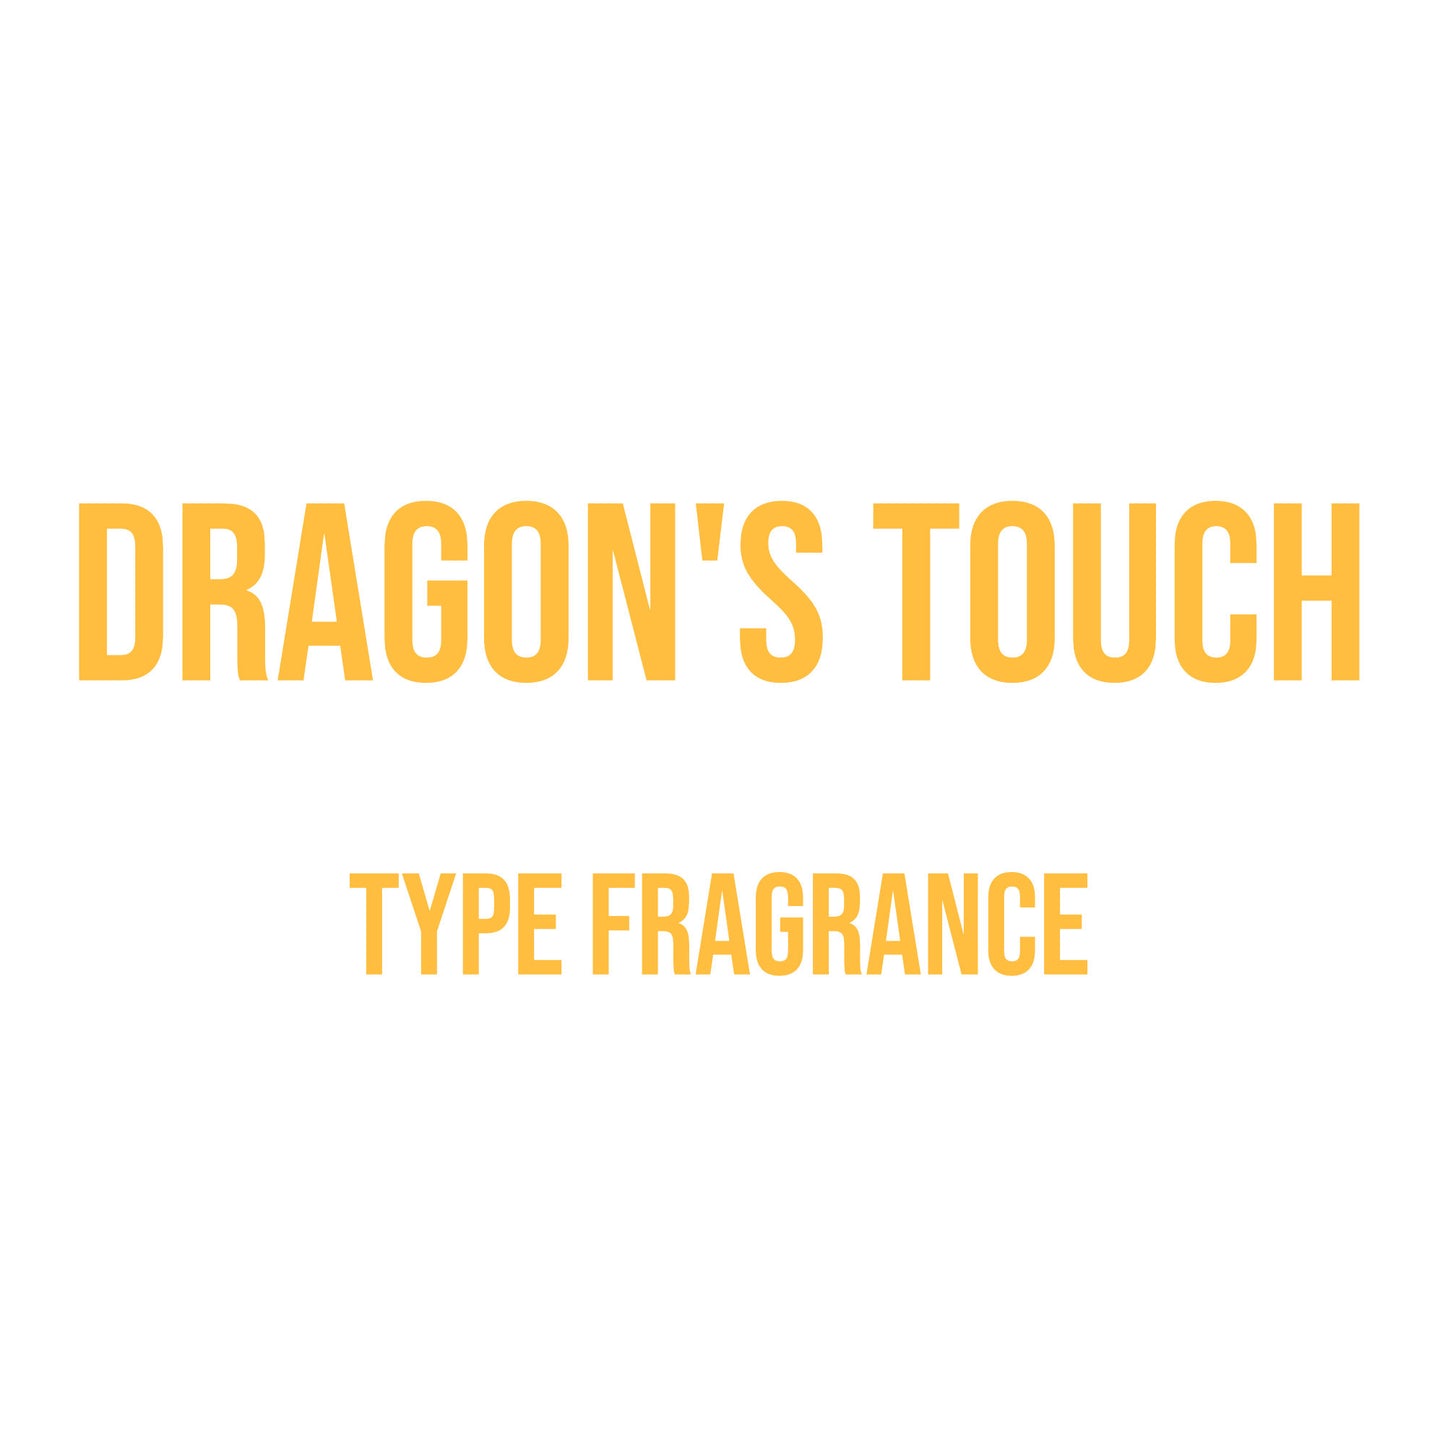 Dragon's Touch Type Fragrance